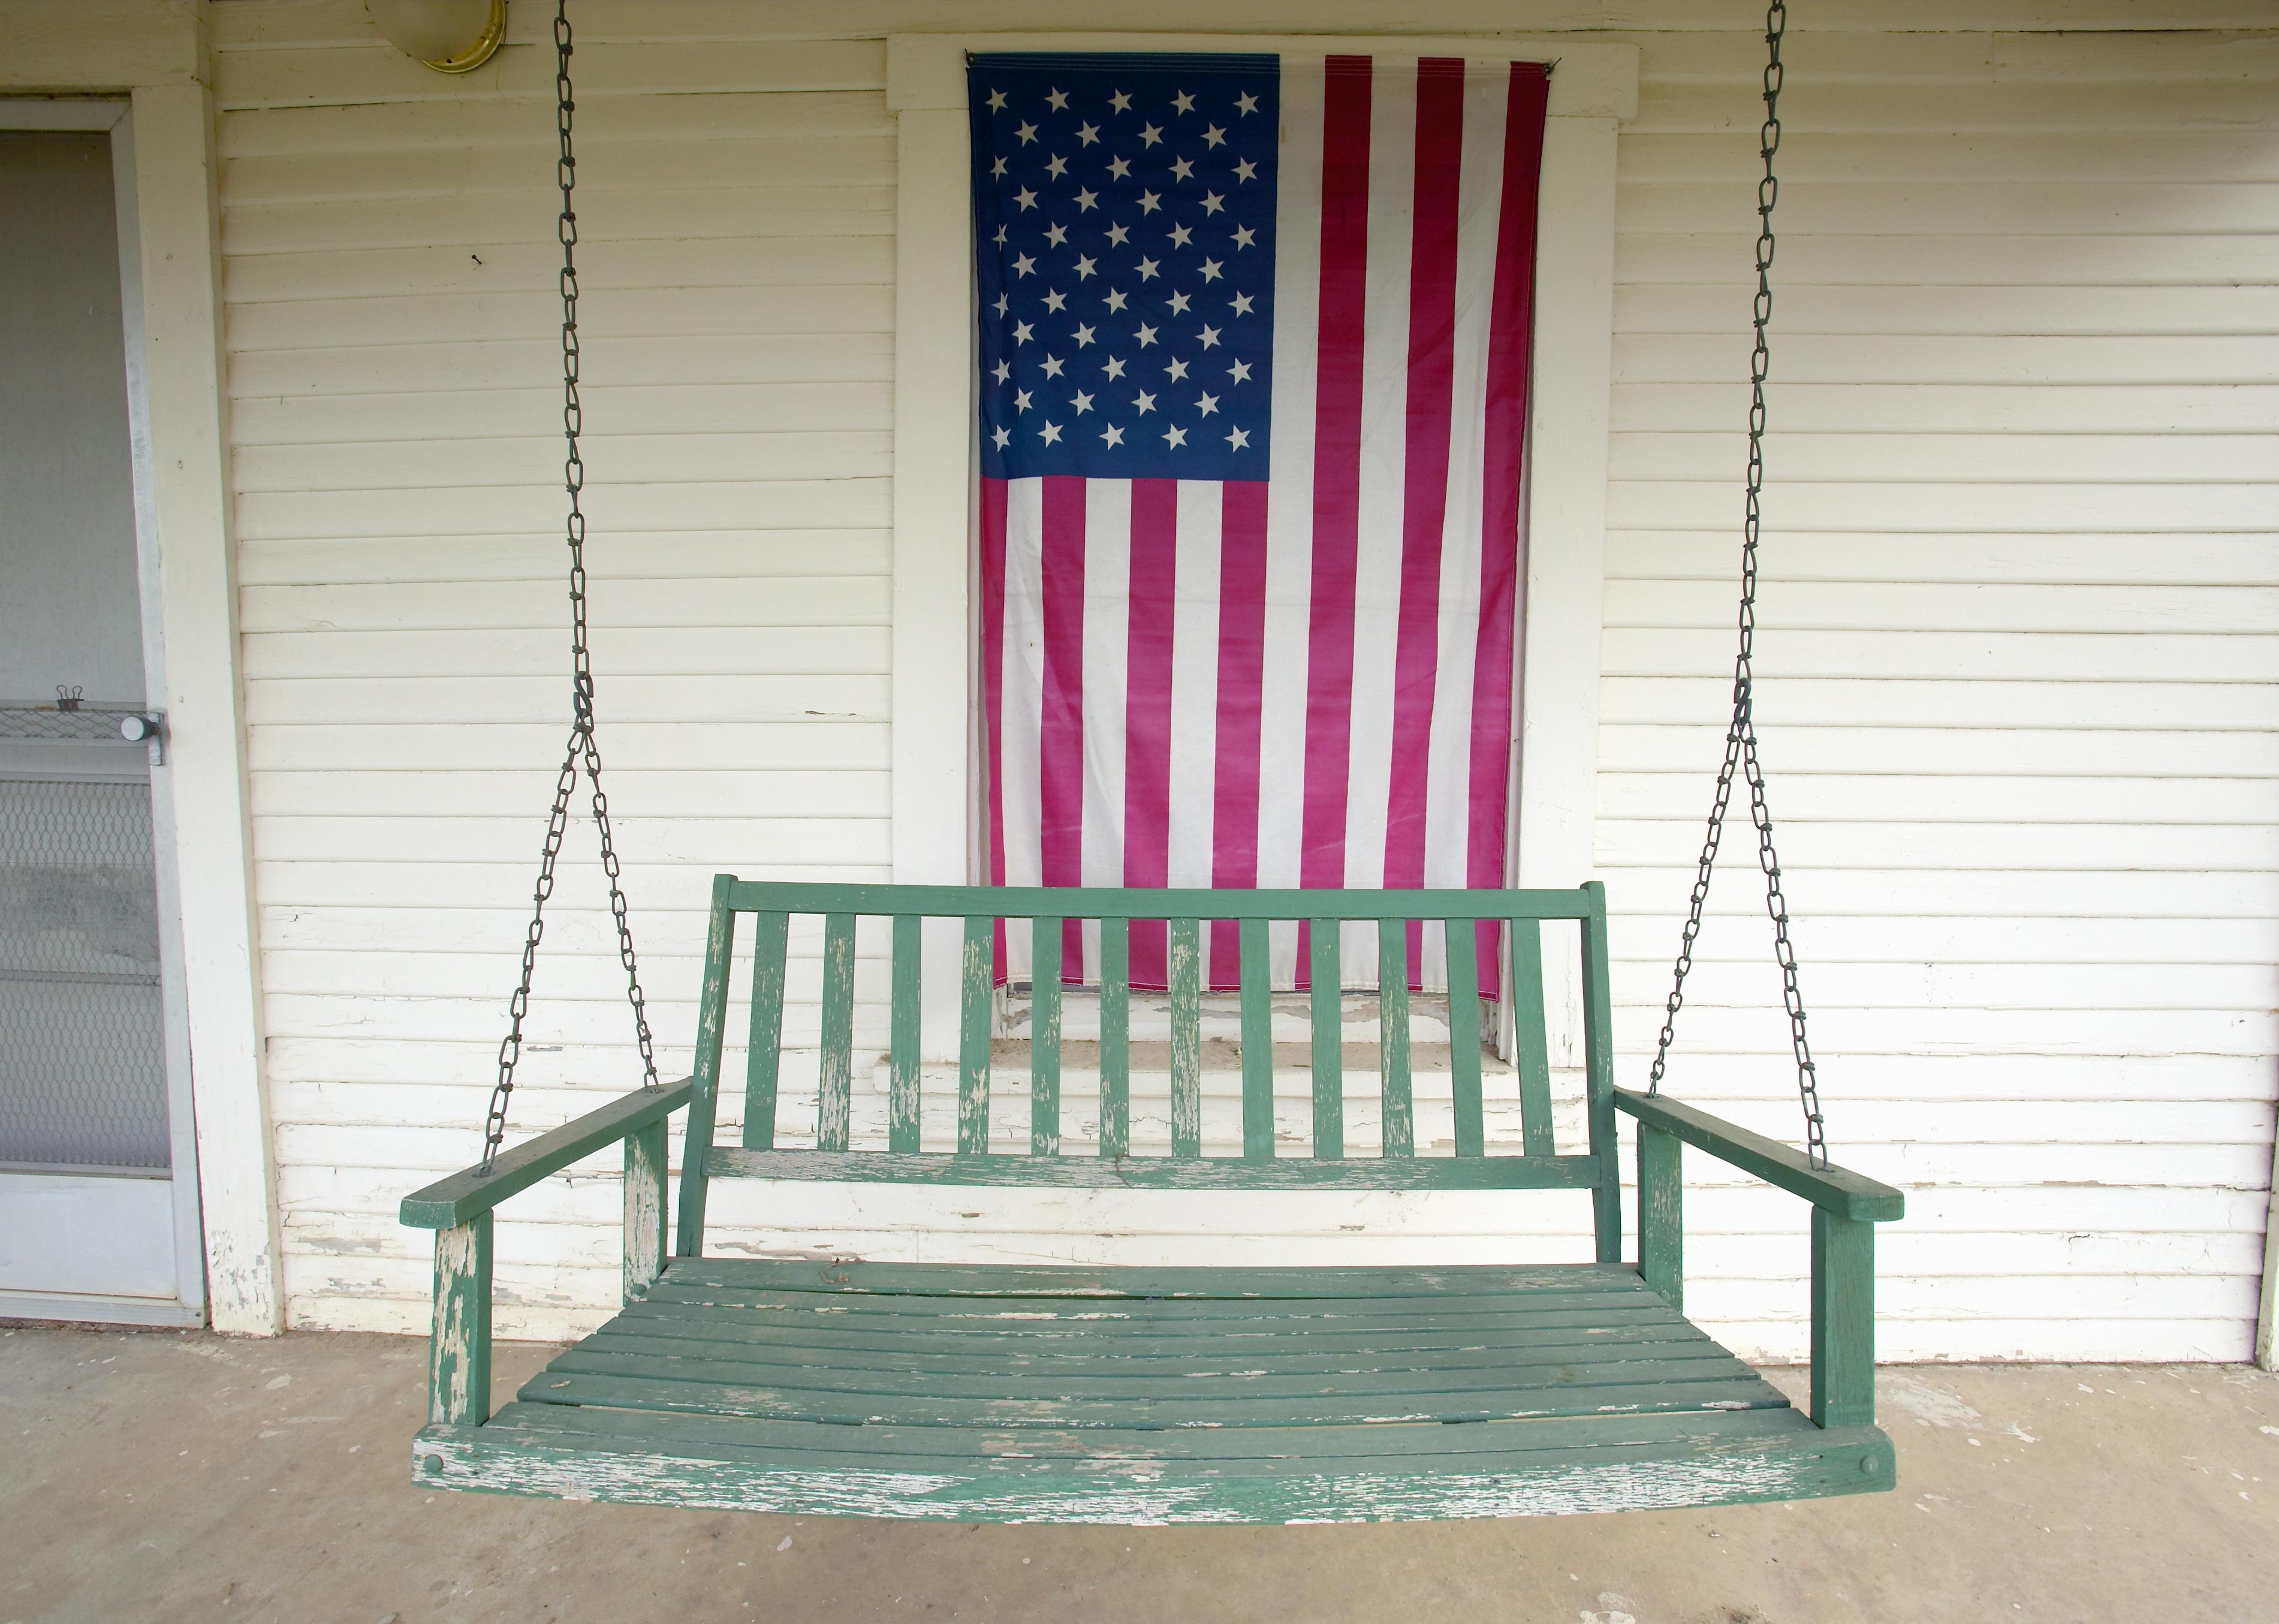  Old swing on porch displaying an American flag